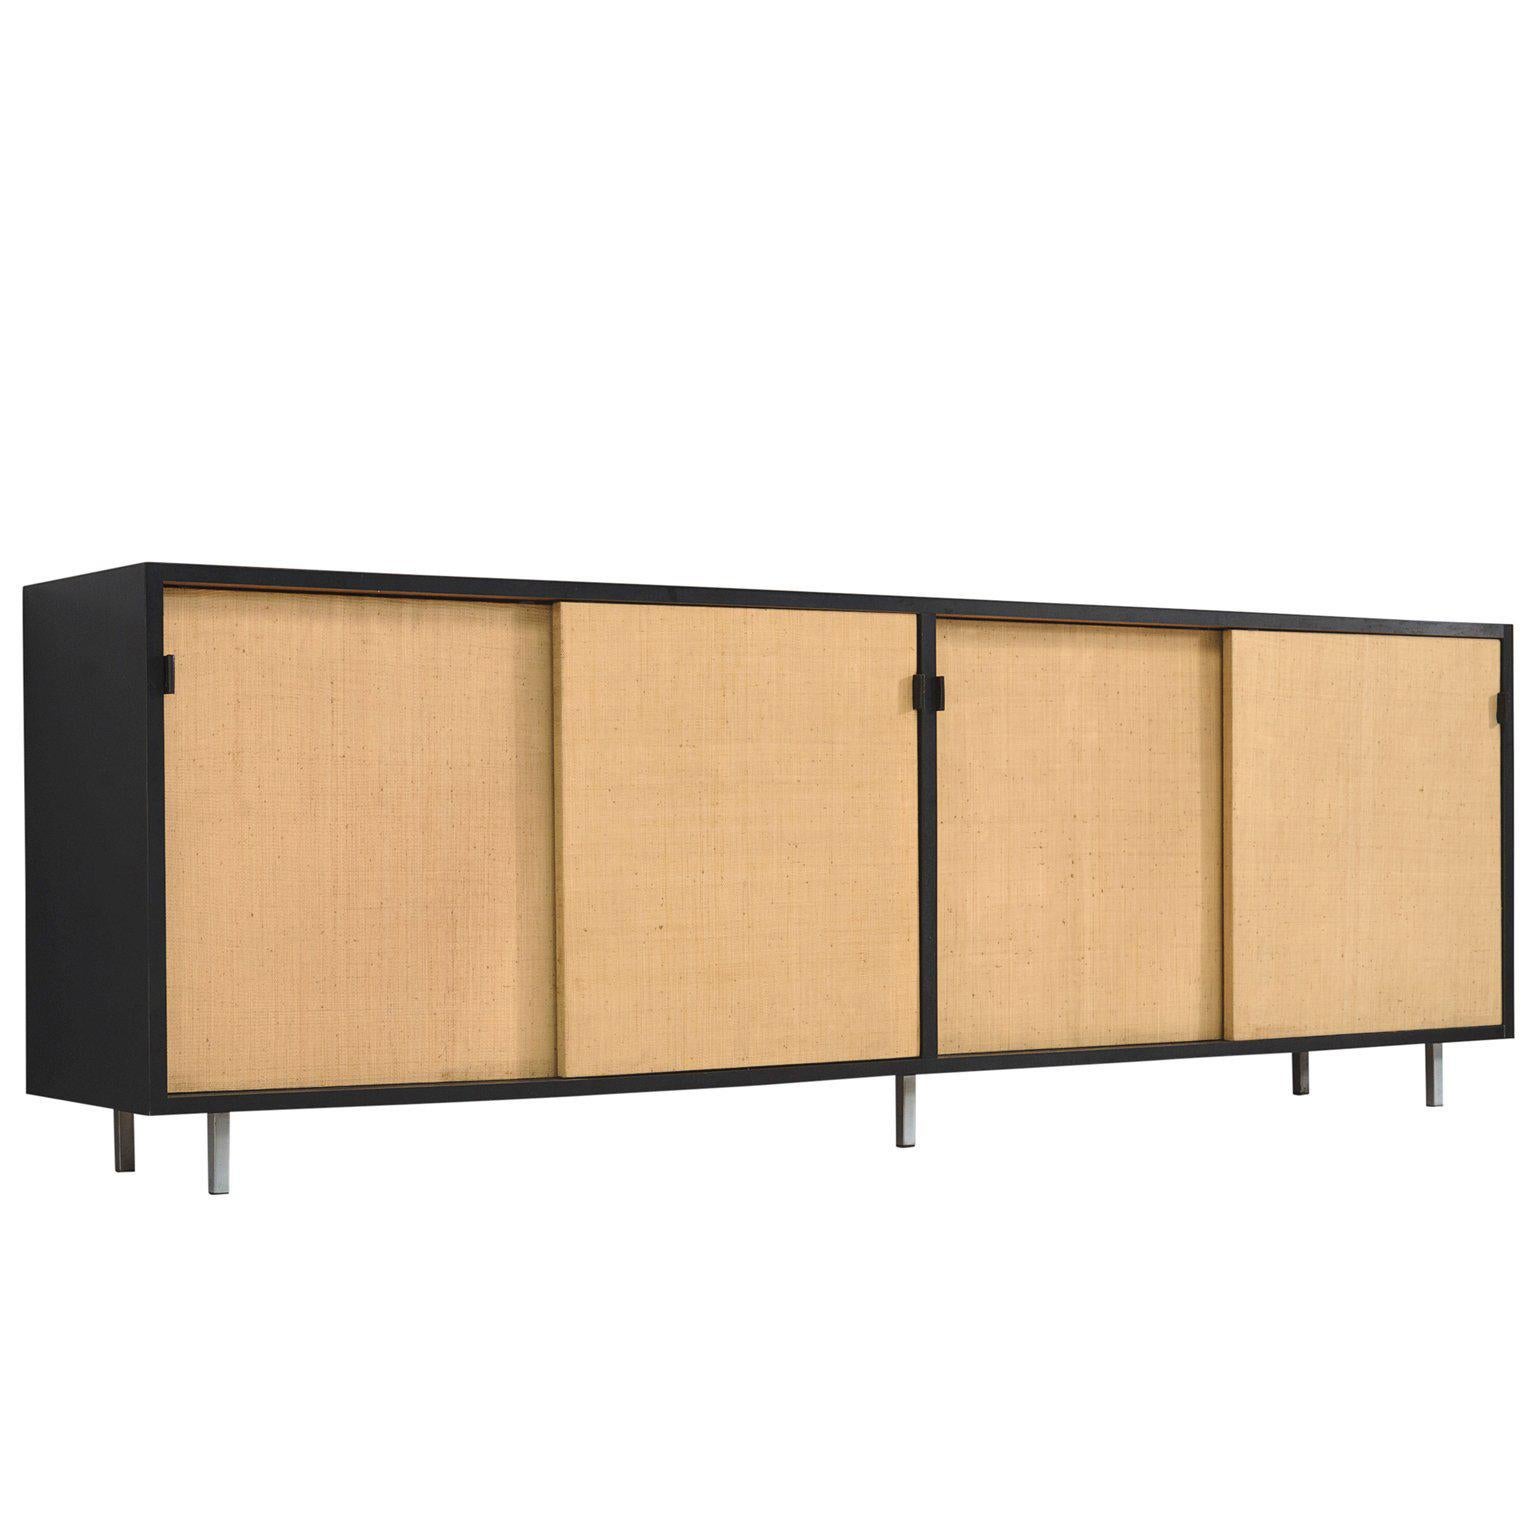 Florence Knoll Seagrass Credenza Designed for Knoll